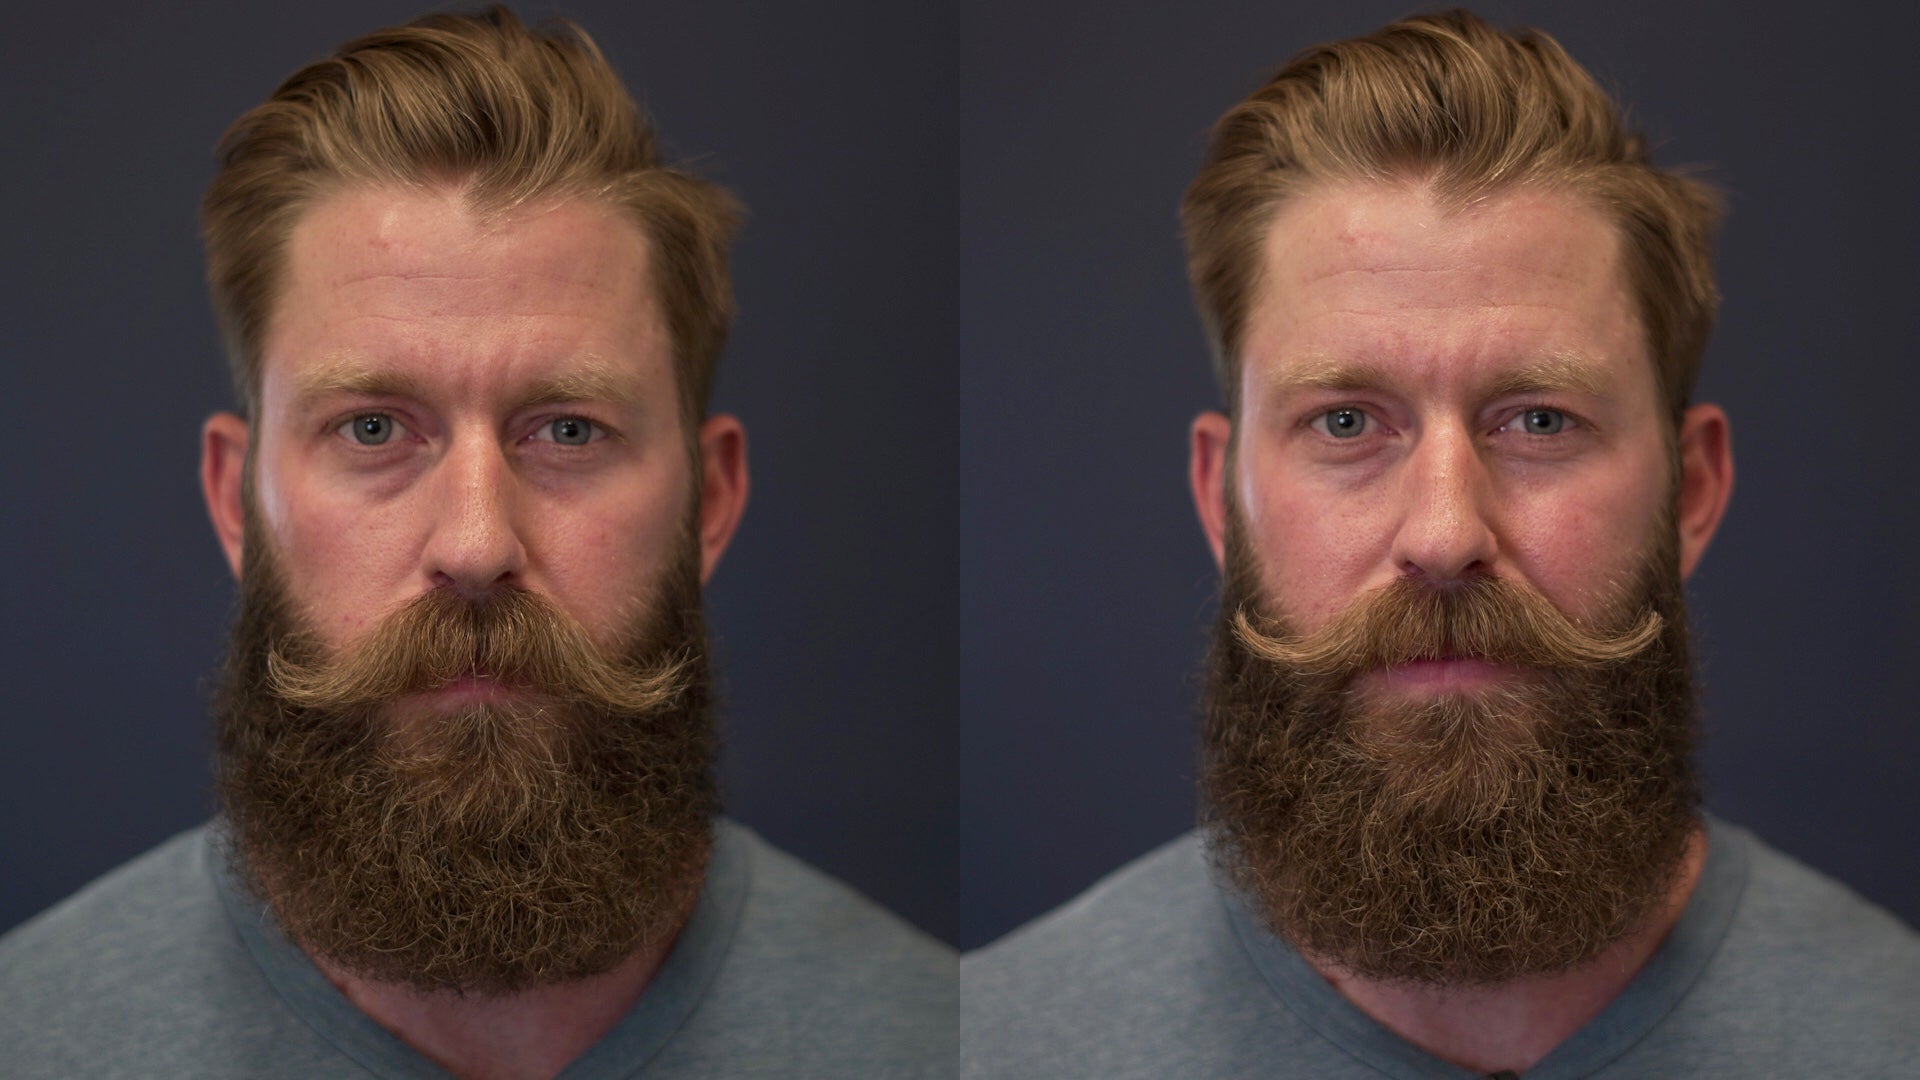 Billy ged september Kvæle Moustache or Mustache? Style and Trimming Tips – Live Bearded